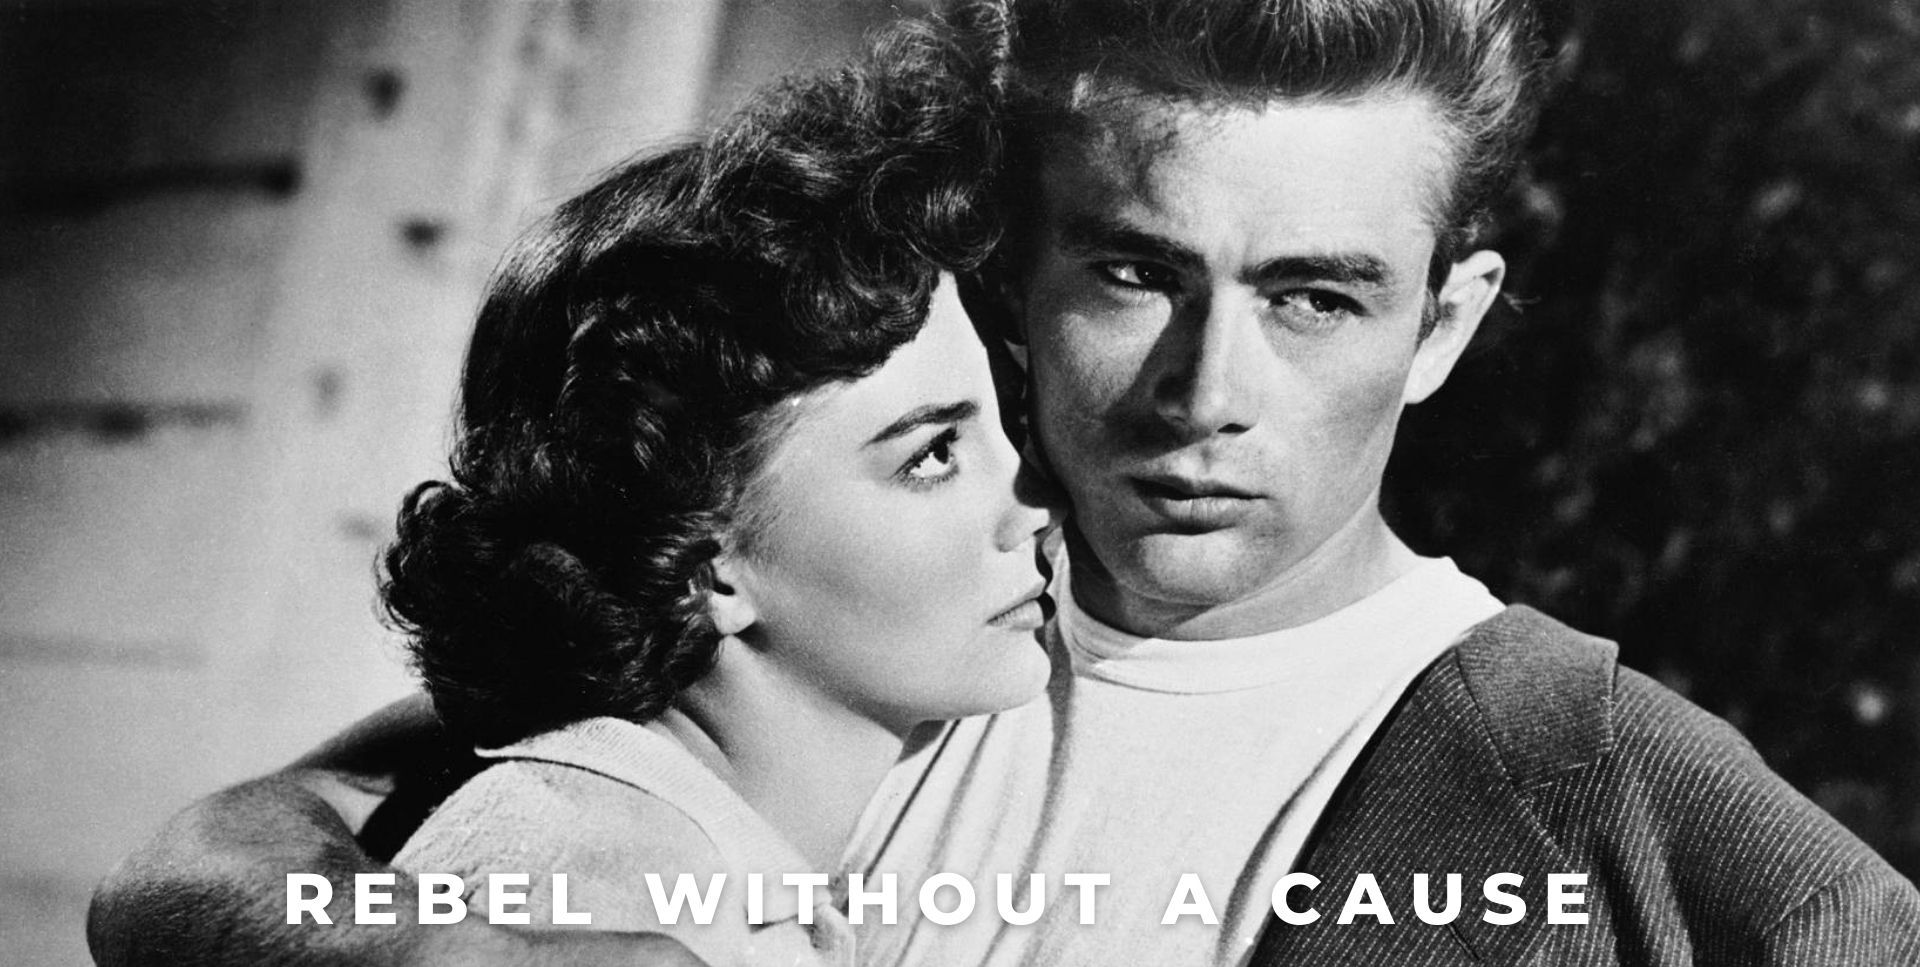 36-facts-about-the-movie-rebel-without-a-cause